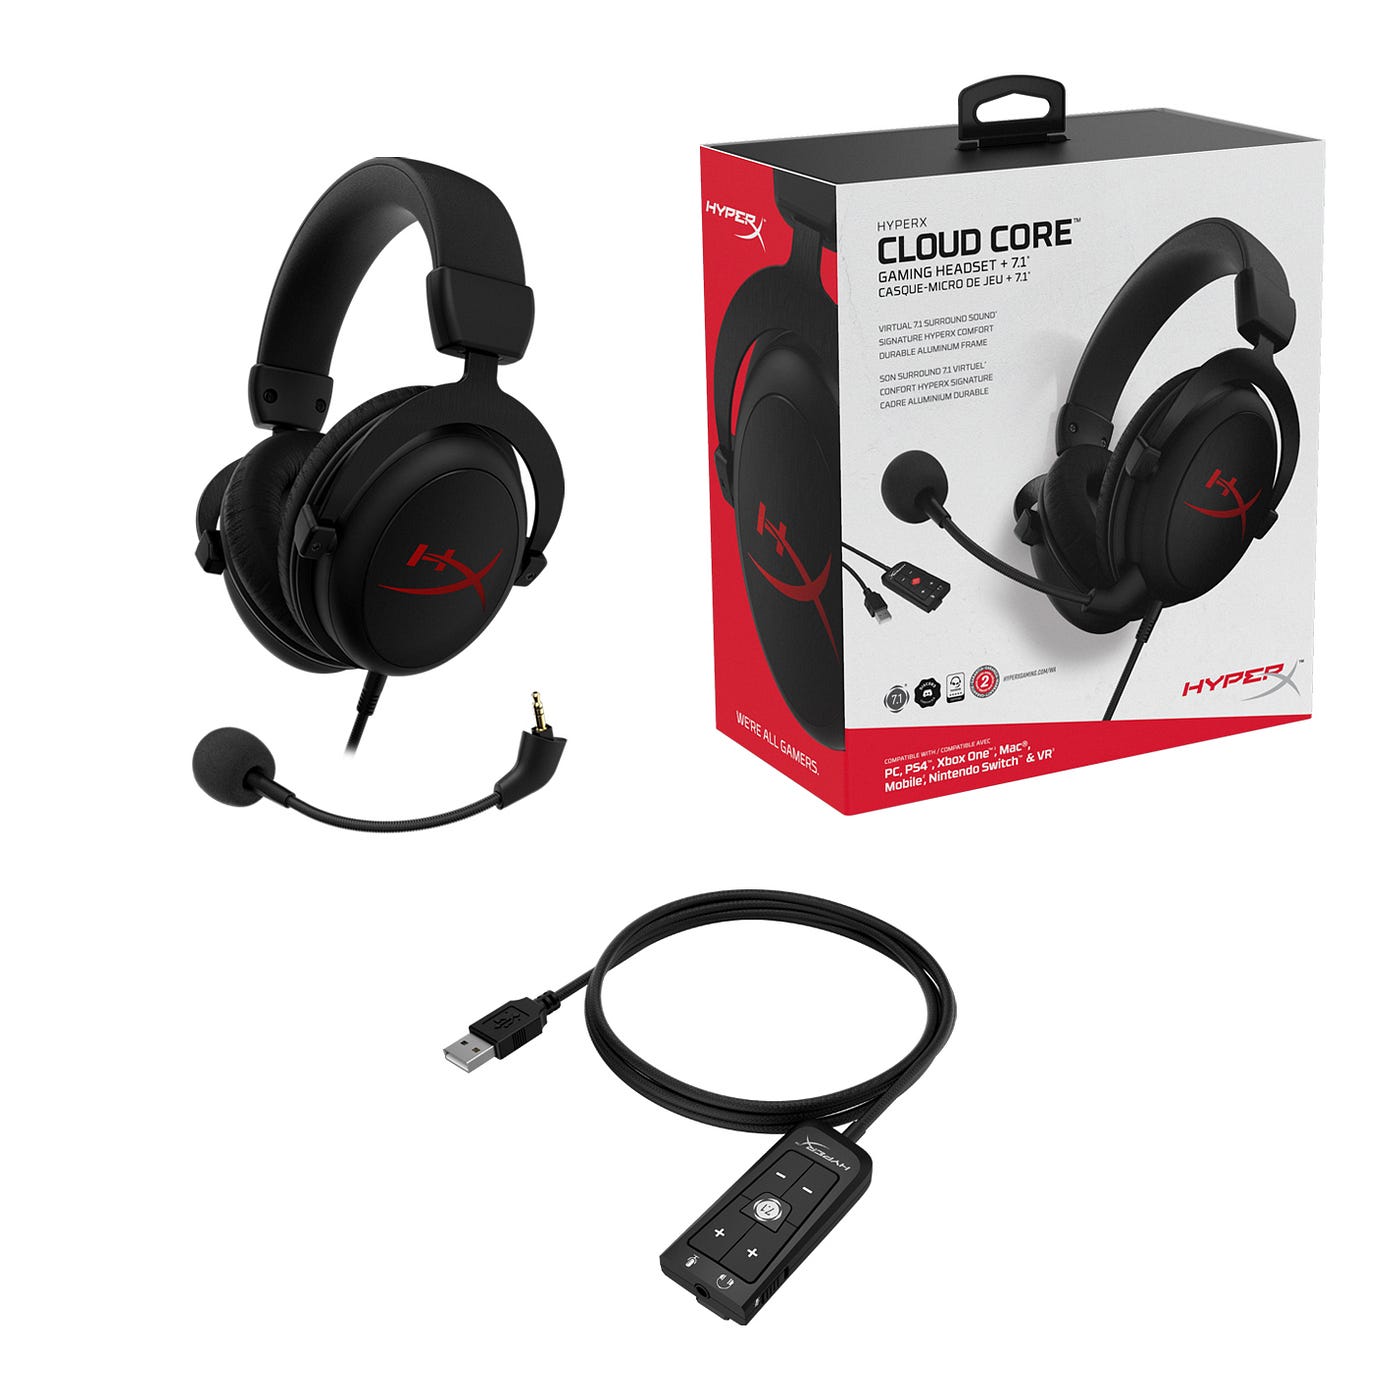 HyperX Launches New Cloud Core + 7.1 Gaming Headset | by Alex Rowe | Medium